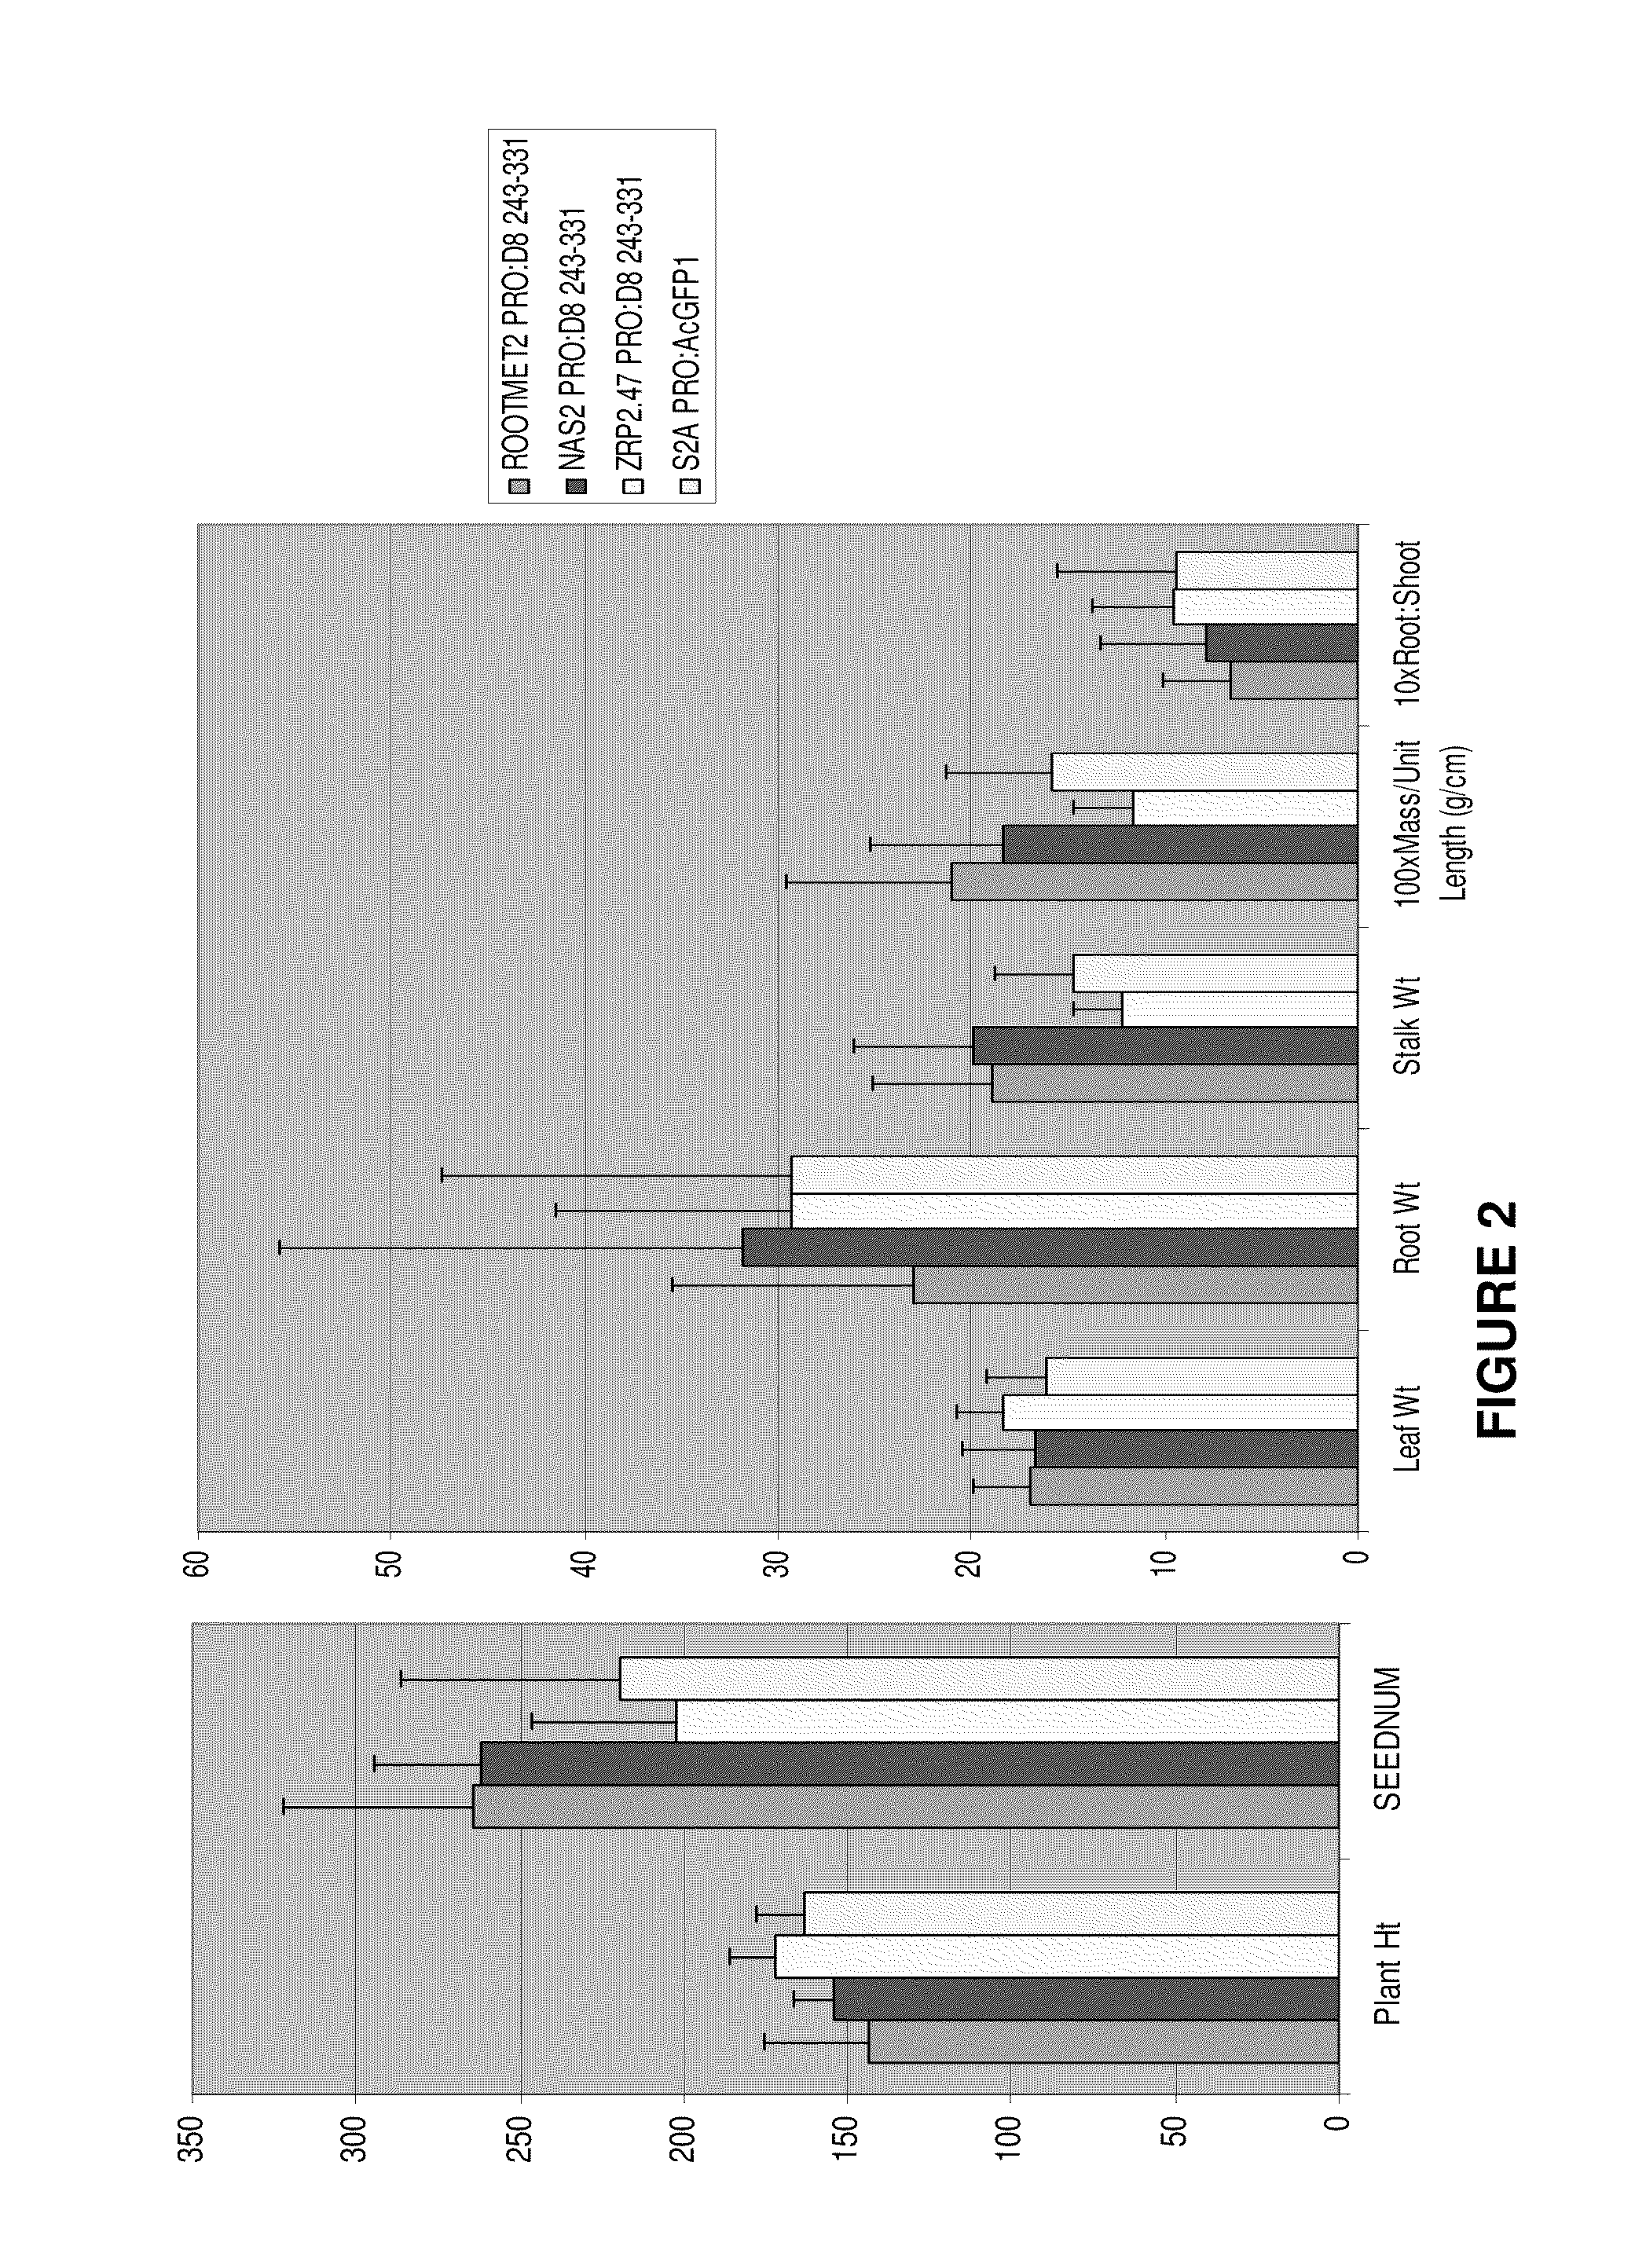 Use of dimerization domain component stacks to modulate plant architecture